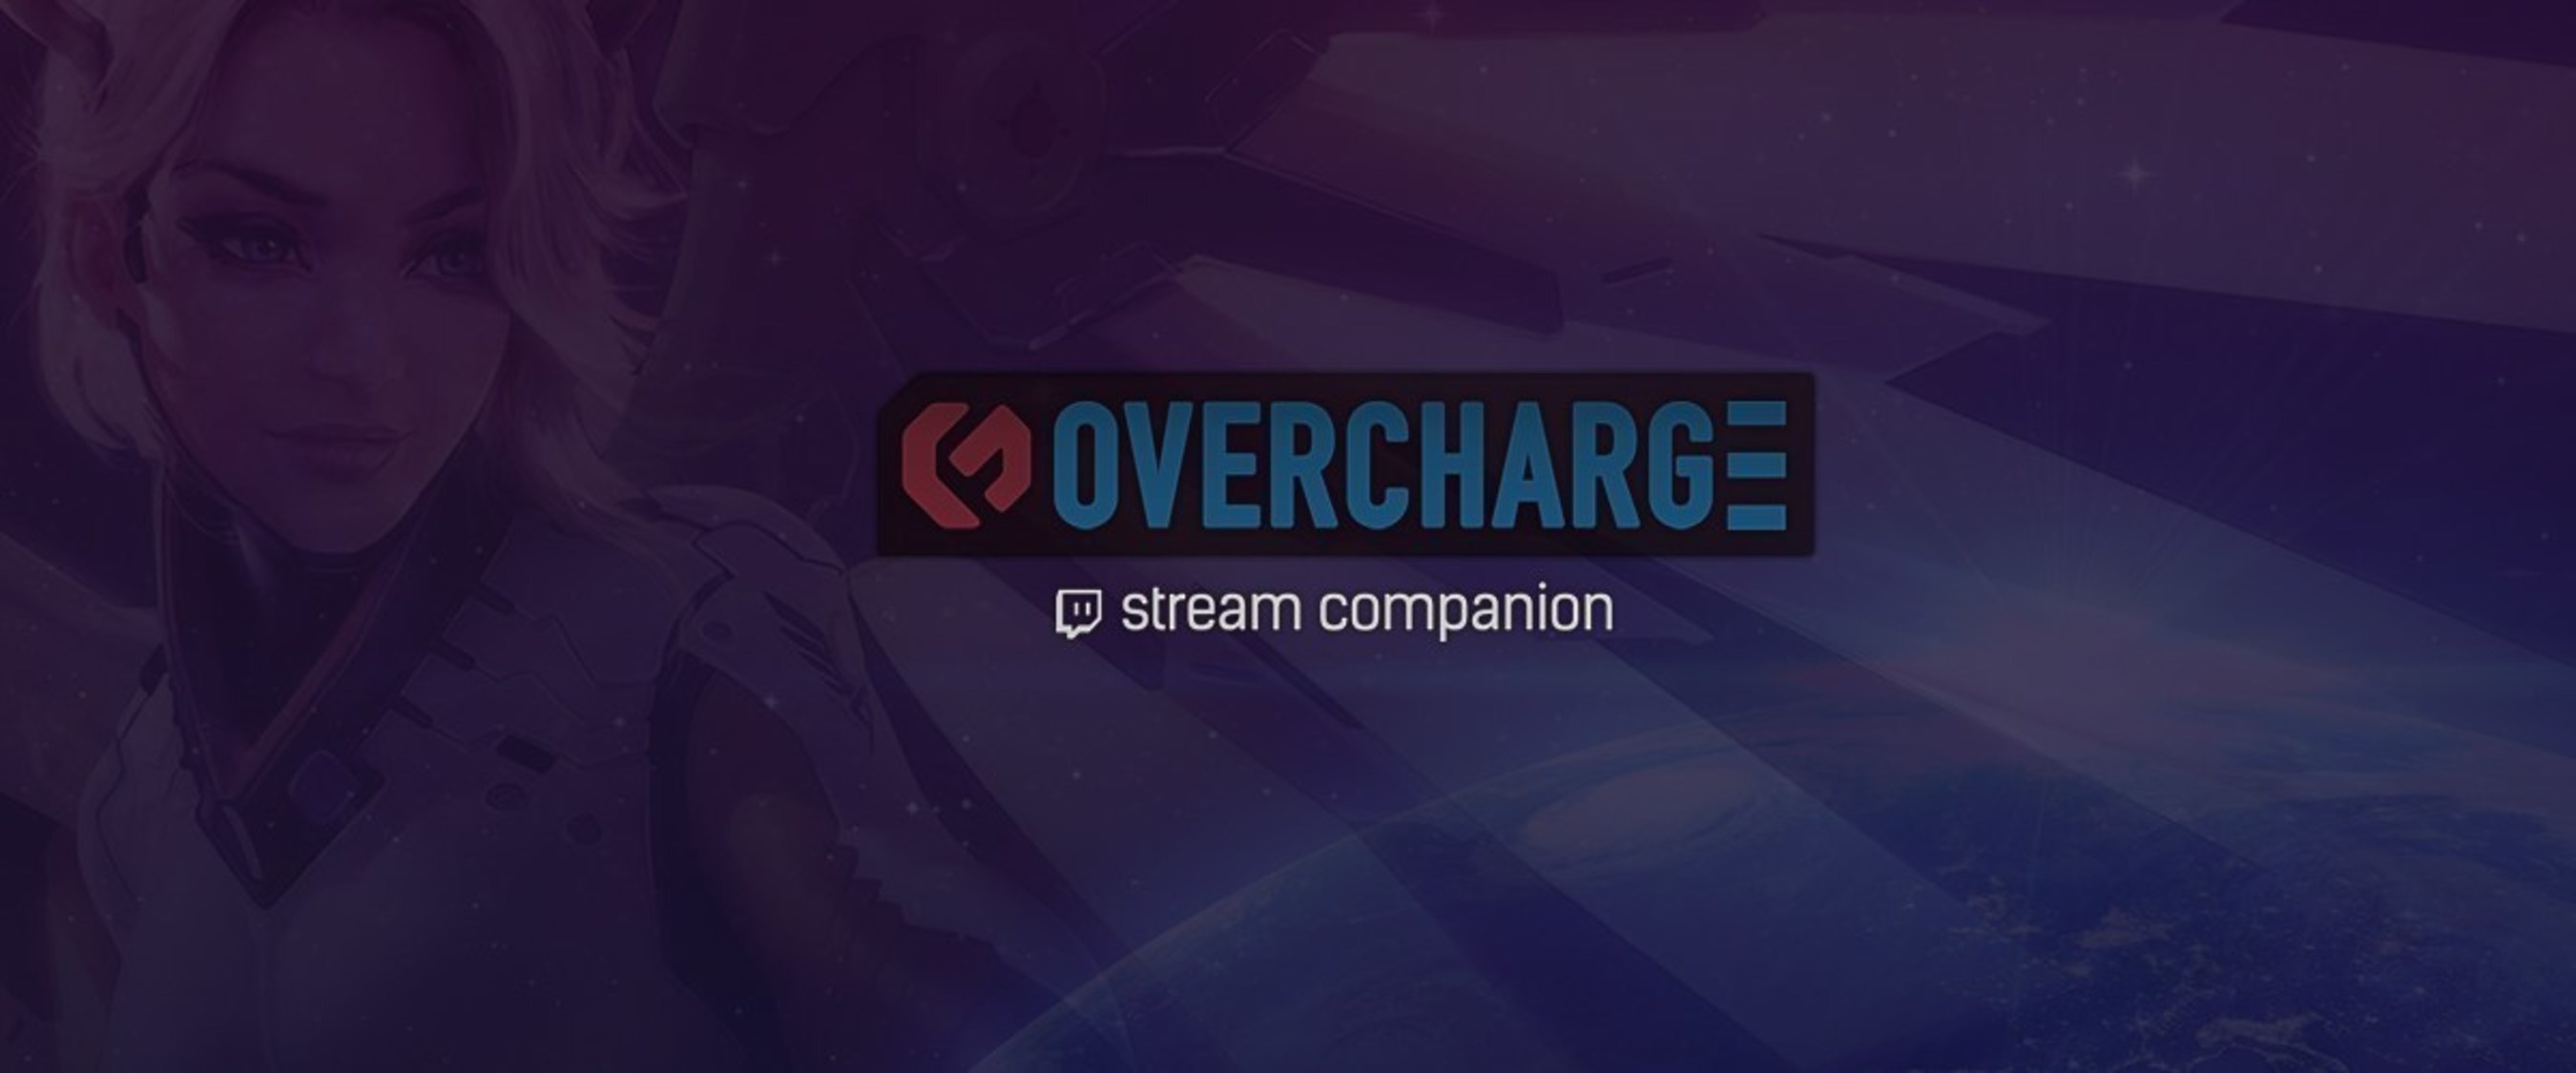 Overcharge.tv - Twitch Enhancement Suite and Stream Companion.